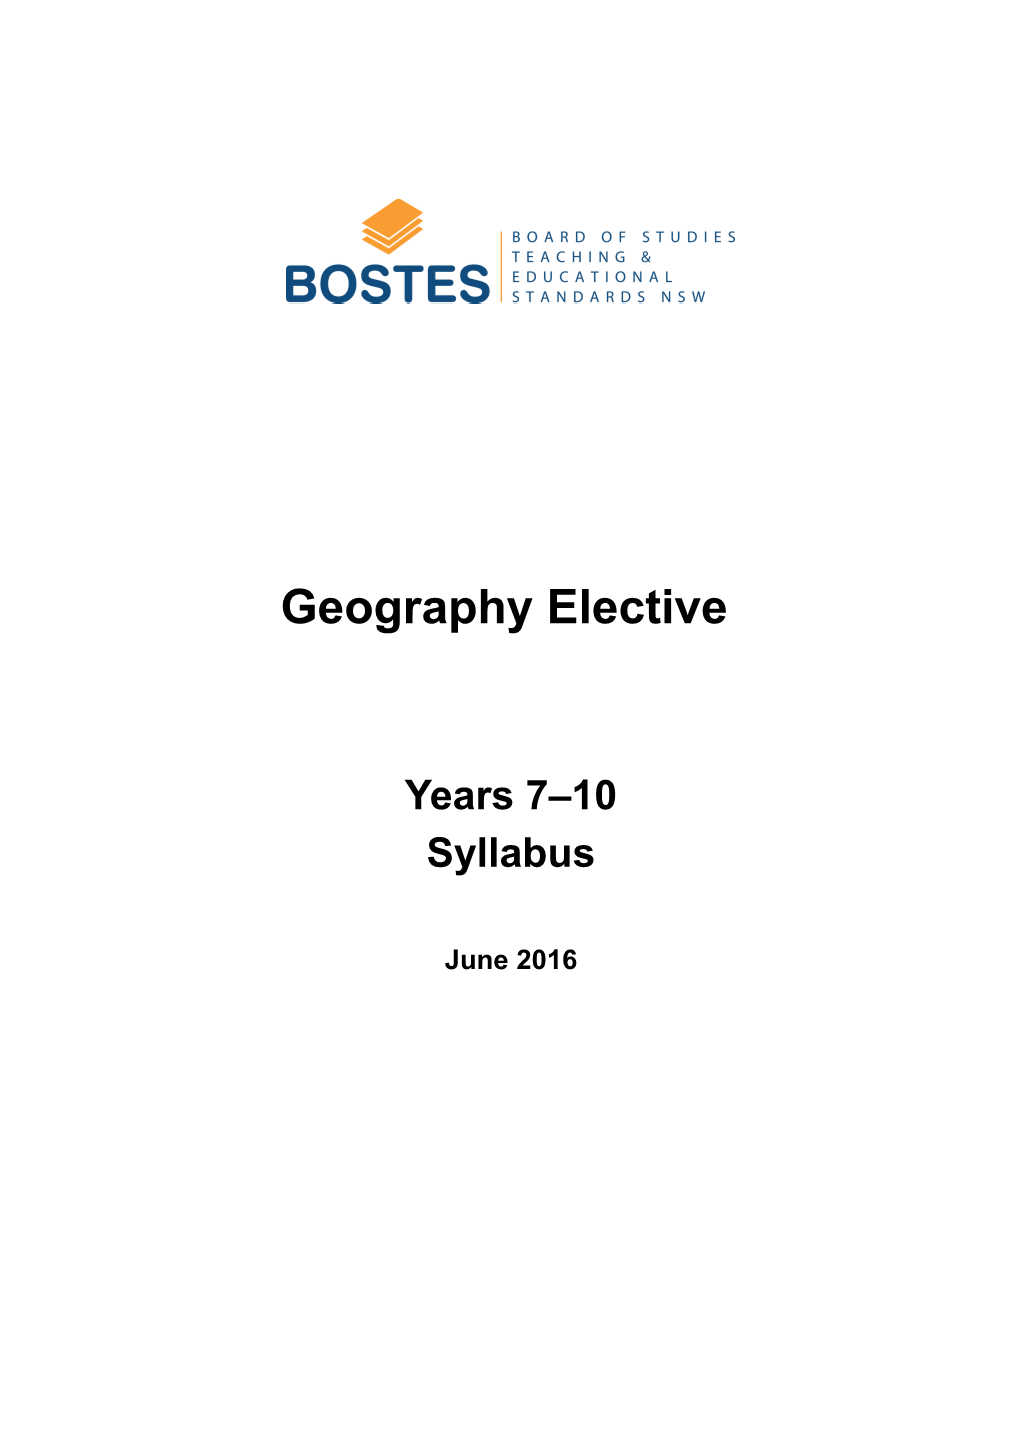 Geography Elective Years 7-10 Syllabus